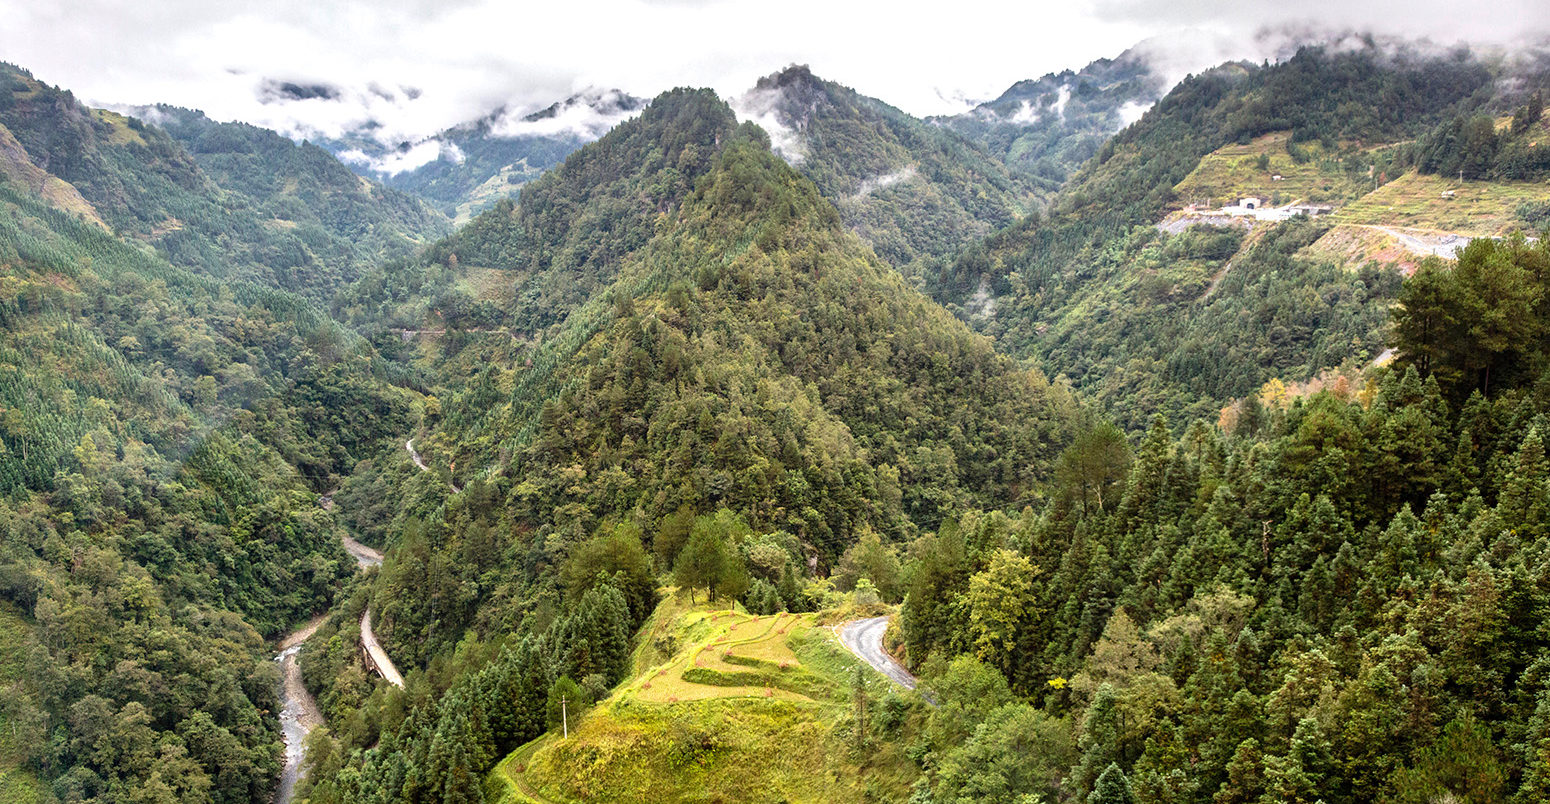 Forested hills of Guizhou, China. Credit: Charles O. Cecil / Alamy Stock Photo. J2N3RM